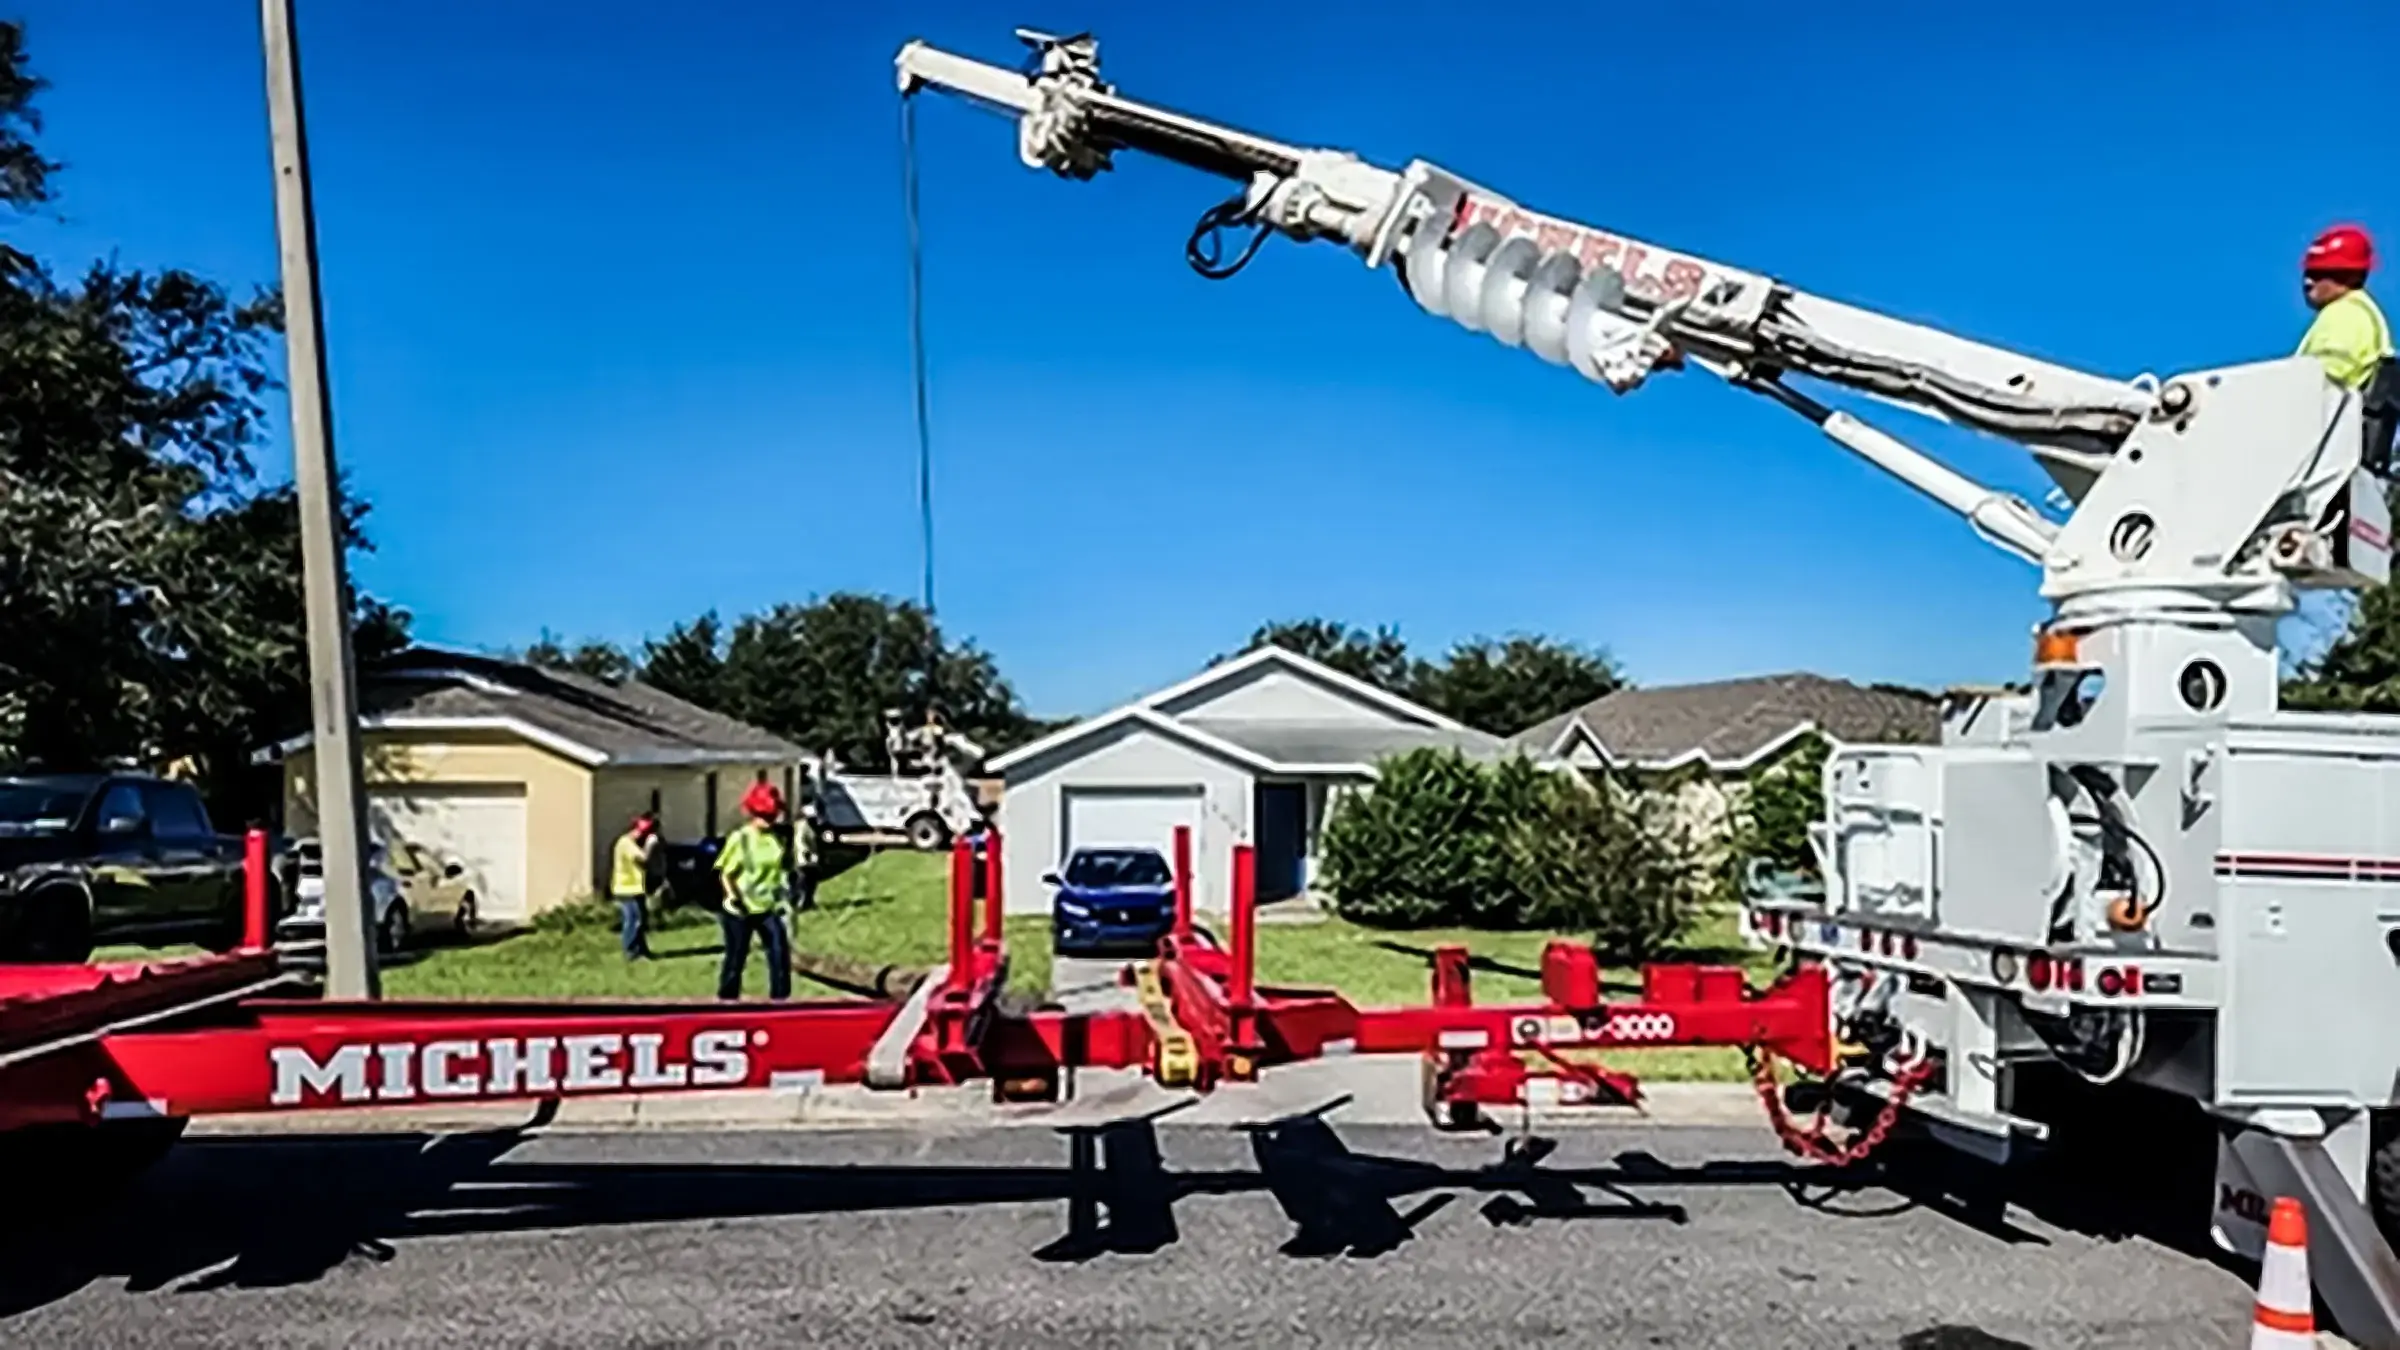 A power pole being replaced by a Michels power crew